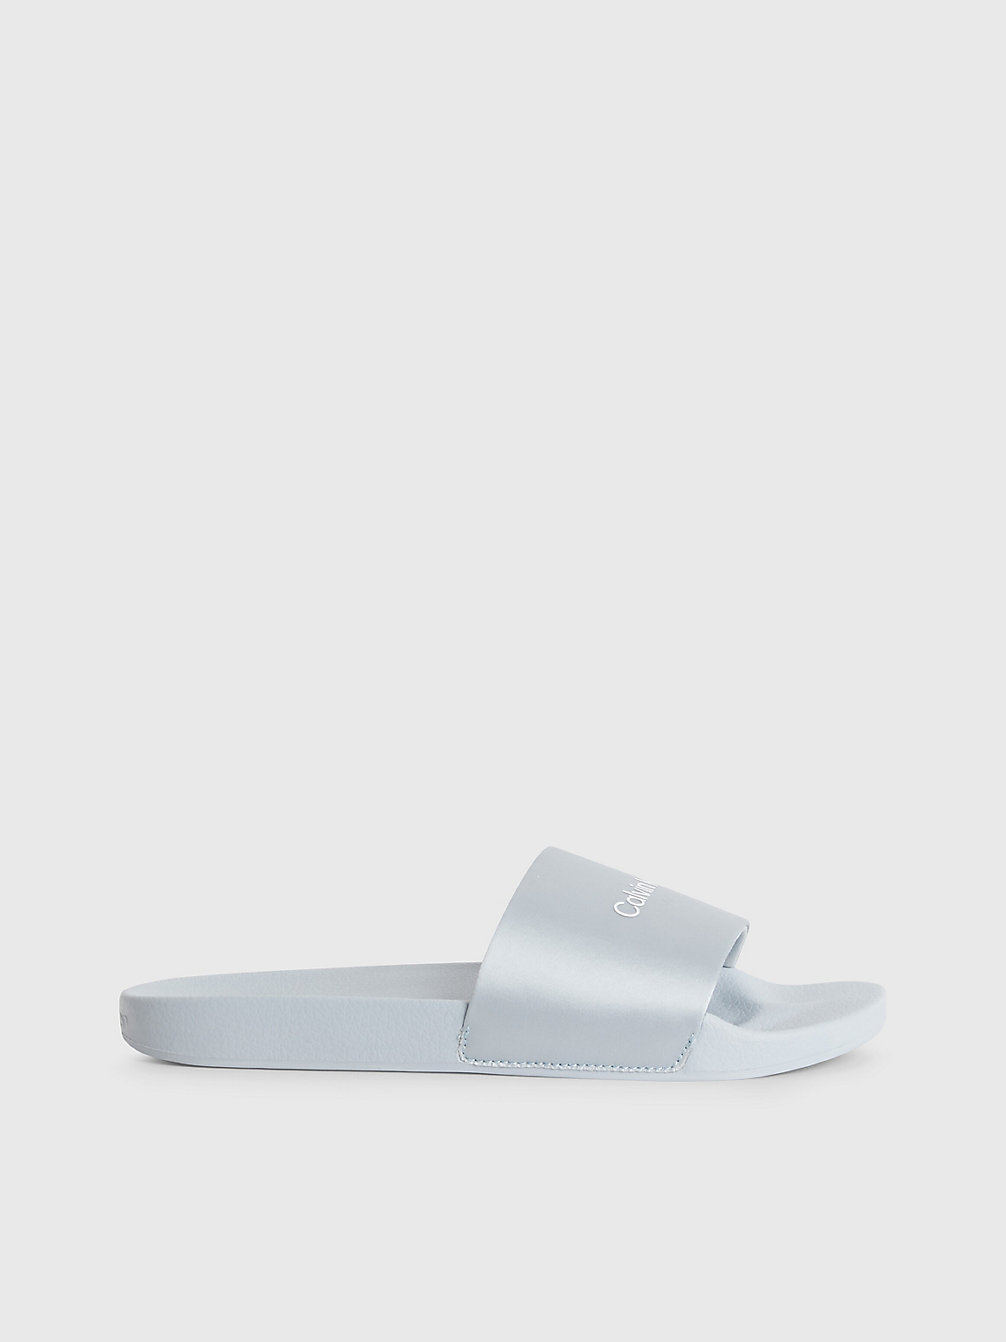 PEARL BLUE / WHITE Recycled Satin Sliders undefined women Calvin Klein